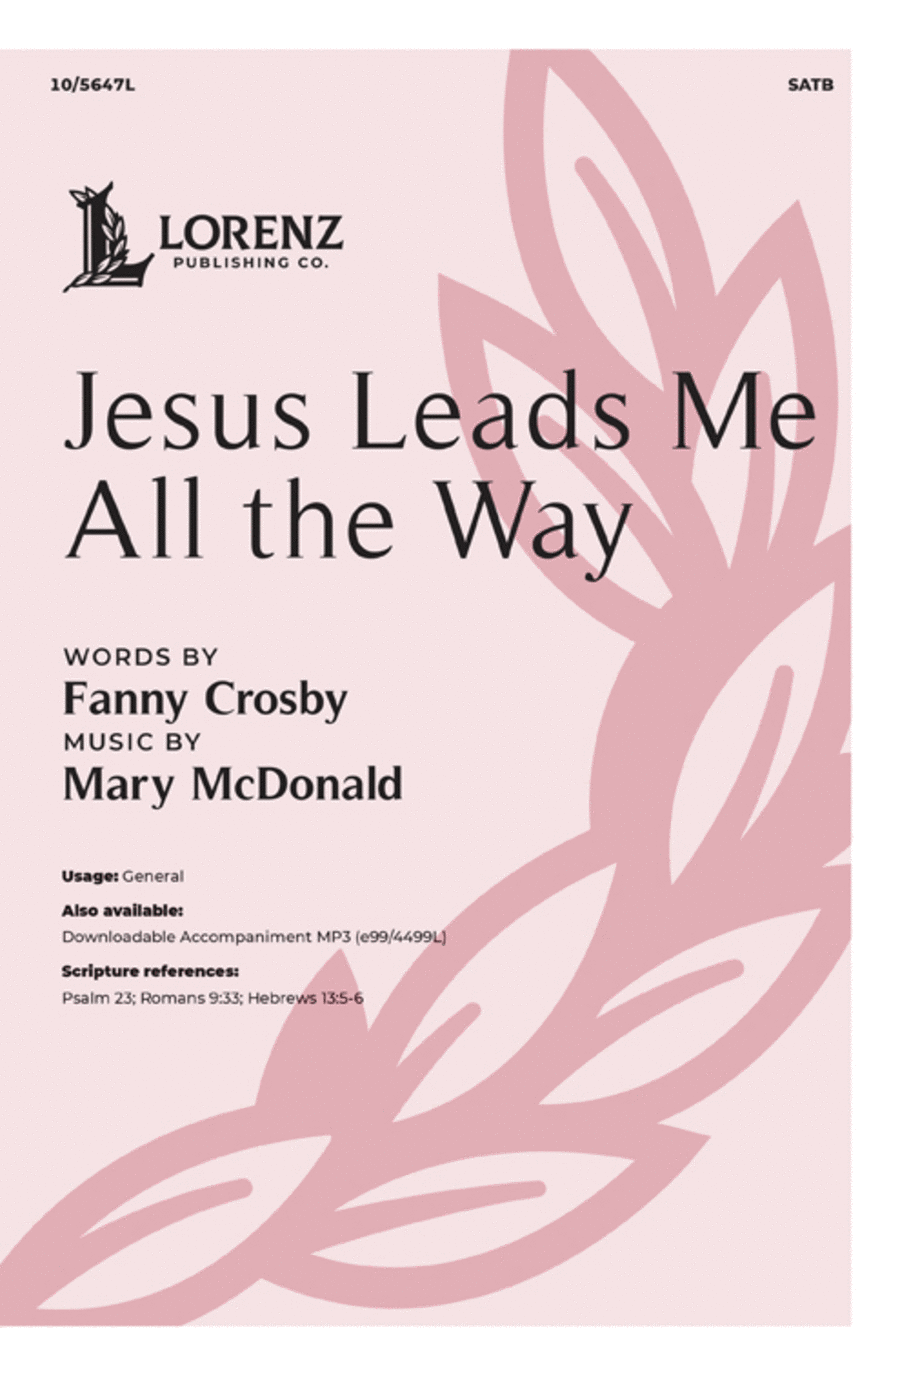 Jesus Leads Me All the Way